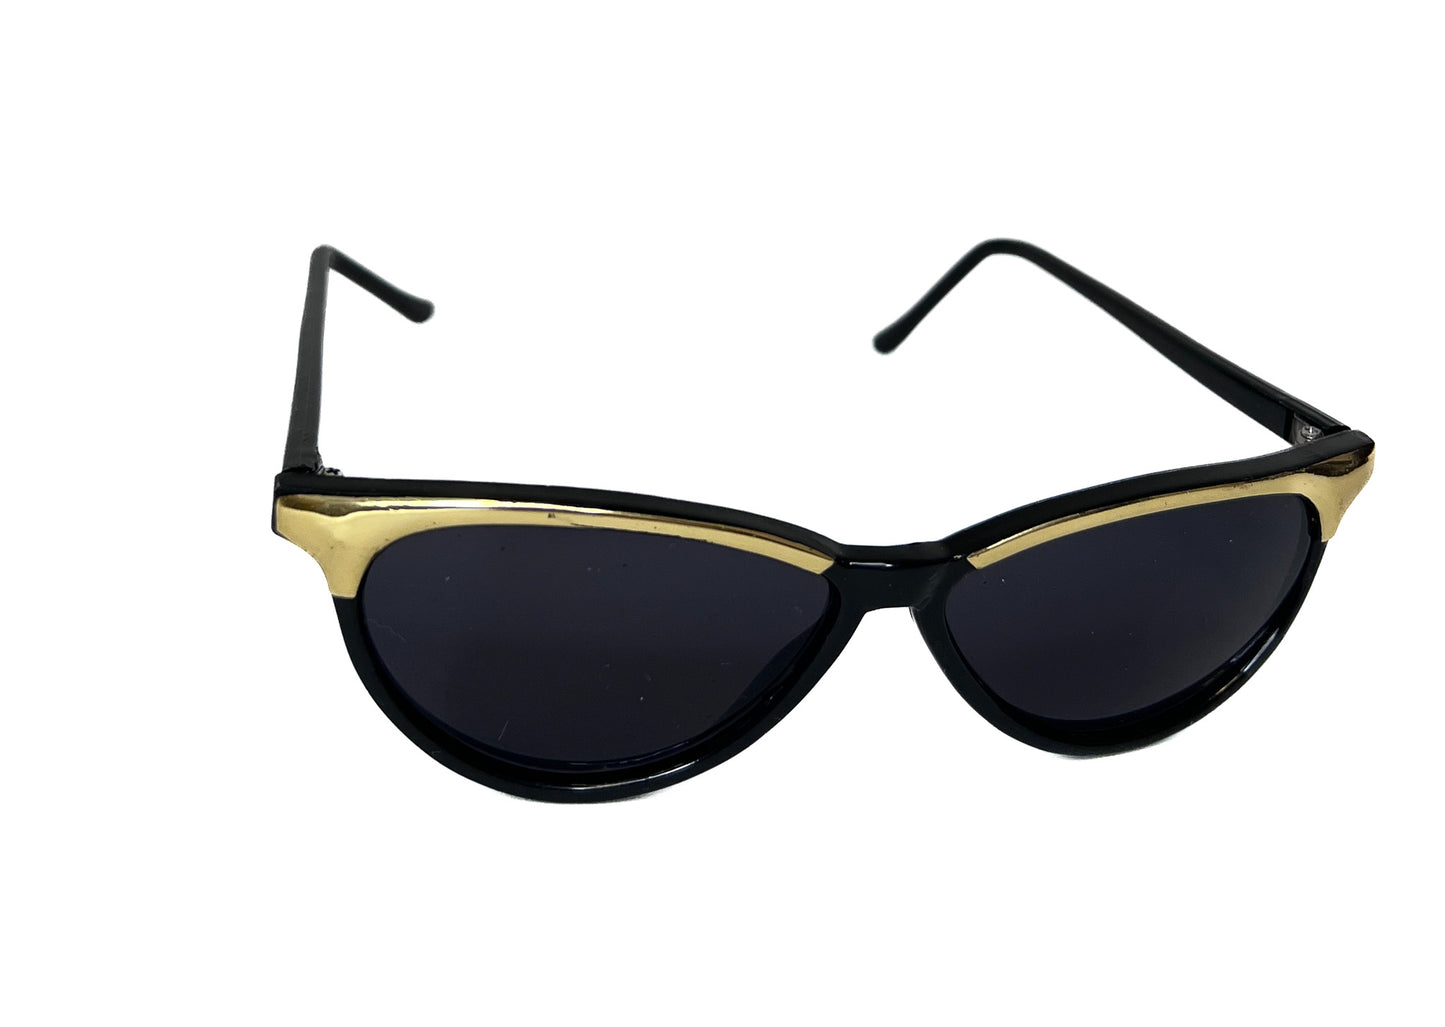 Men's Oval Sunglasses | Gold and Black Frame Sunglasses | Suxess